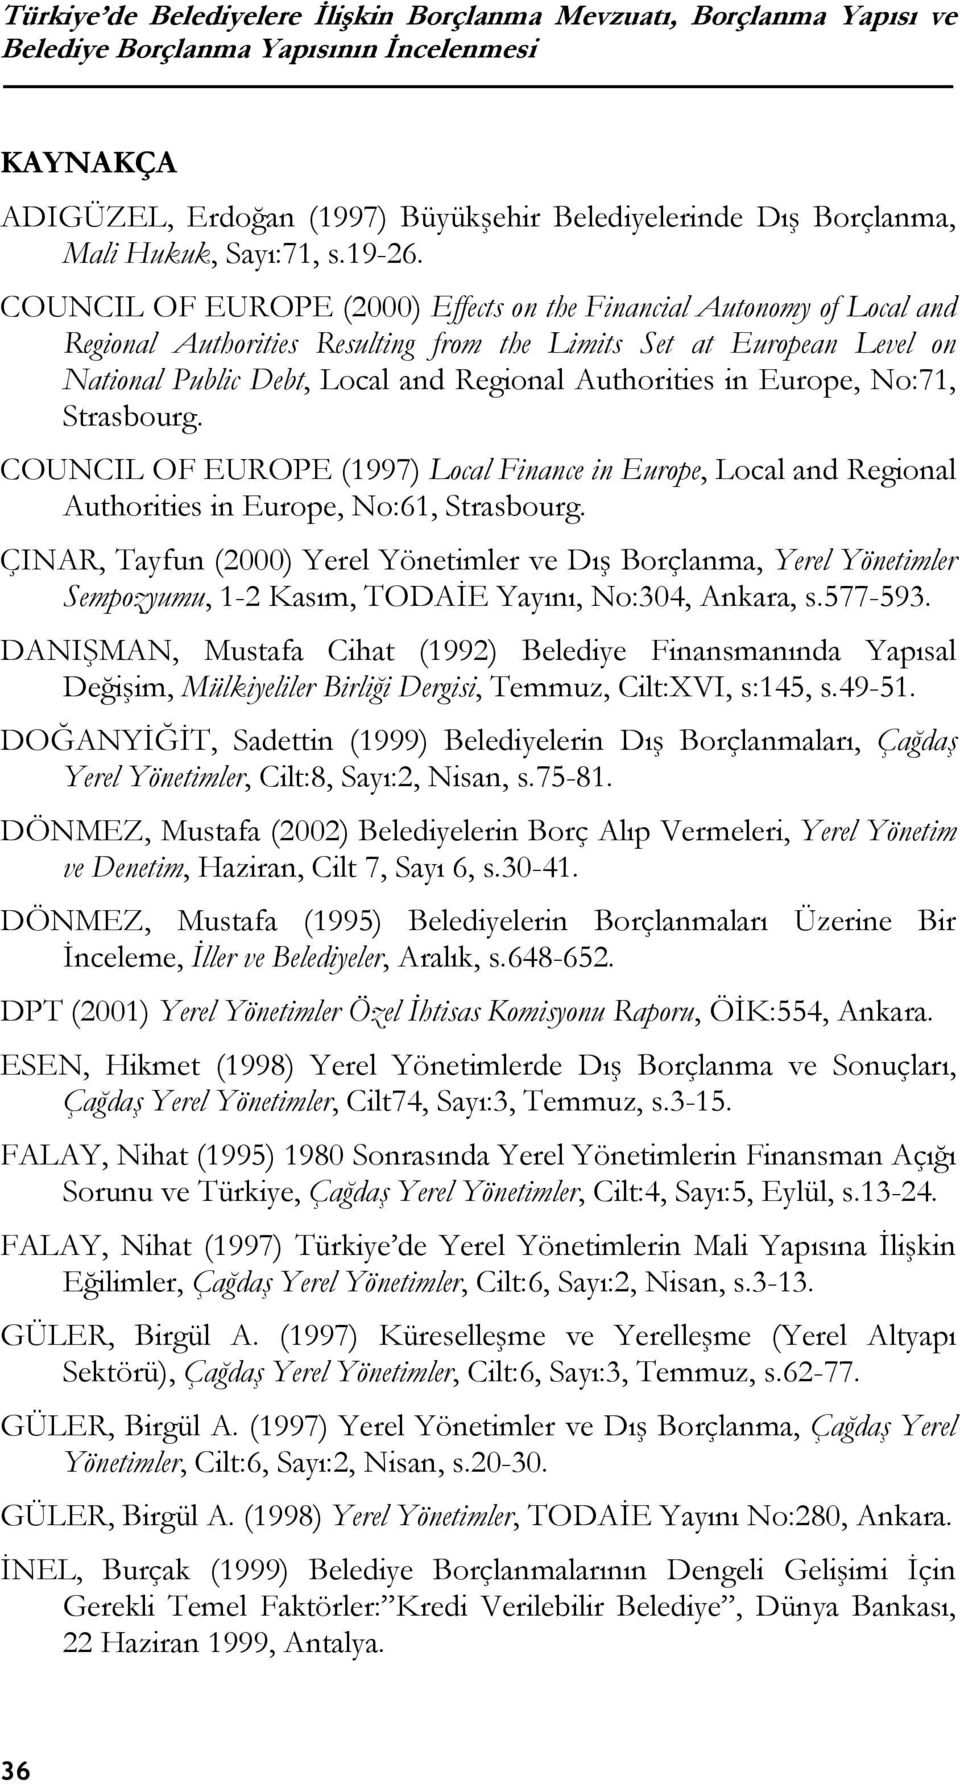 COUNCIL OF EUROPE (2000) Effects on the Financial Autonomy of Local and Regional Authorities Resulting from the Limits Set at European Level on National Public Debt, Local and Regional Authorities in